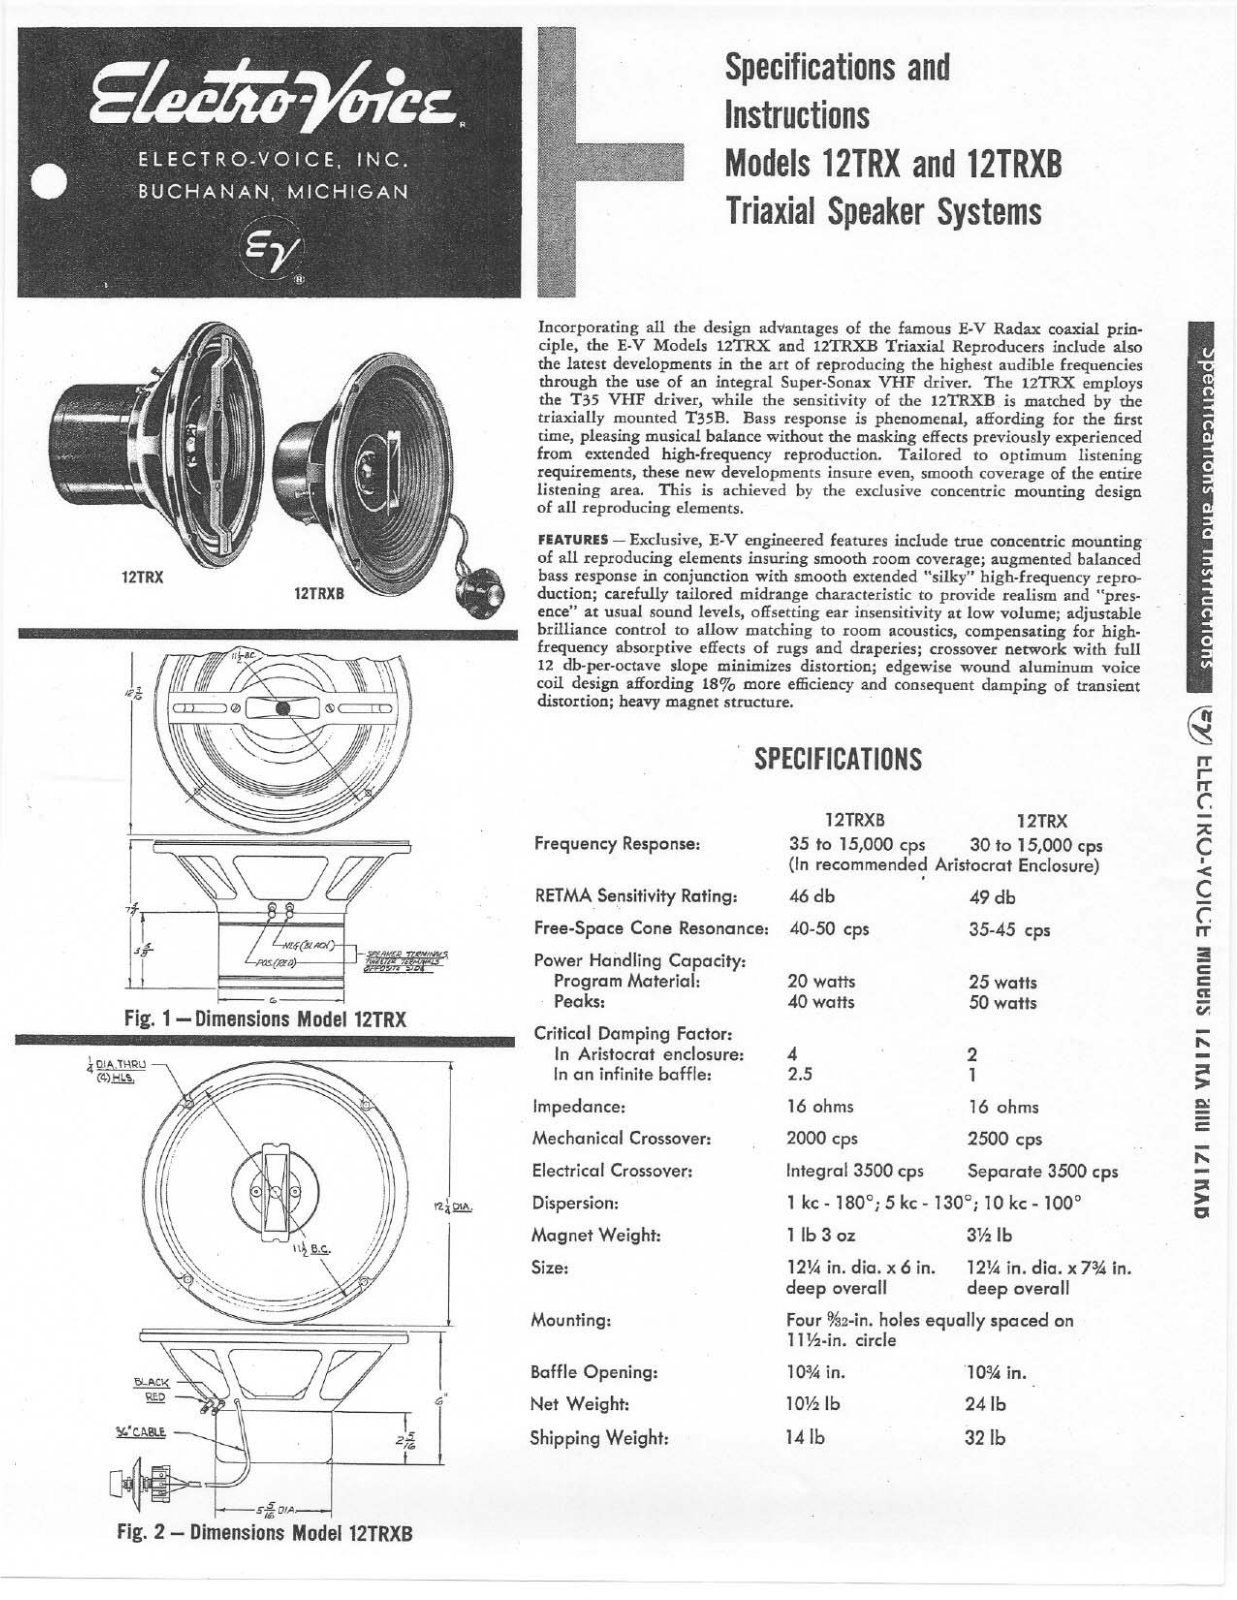 Electro-voice 12TRXB, 12TRX specification and instructions